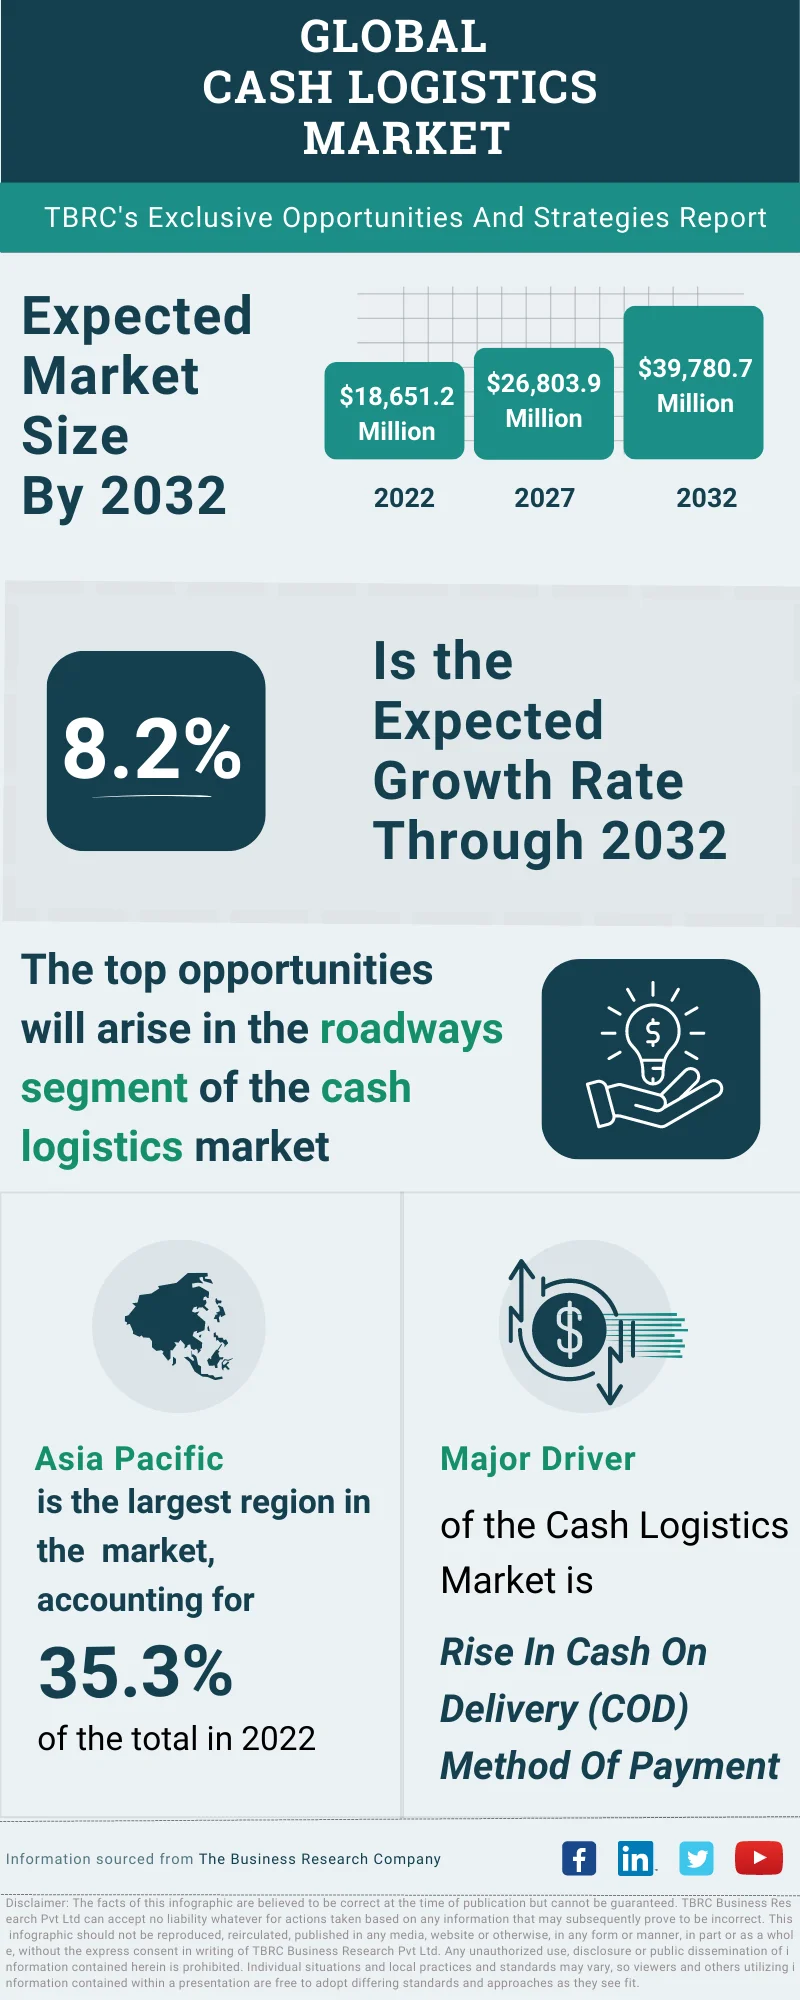 Cash Logistics Global Market Opportunities And Strategies To 2032